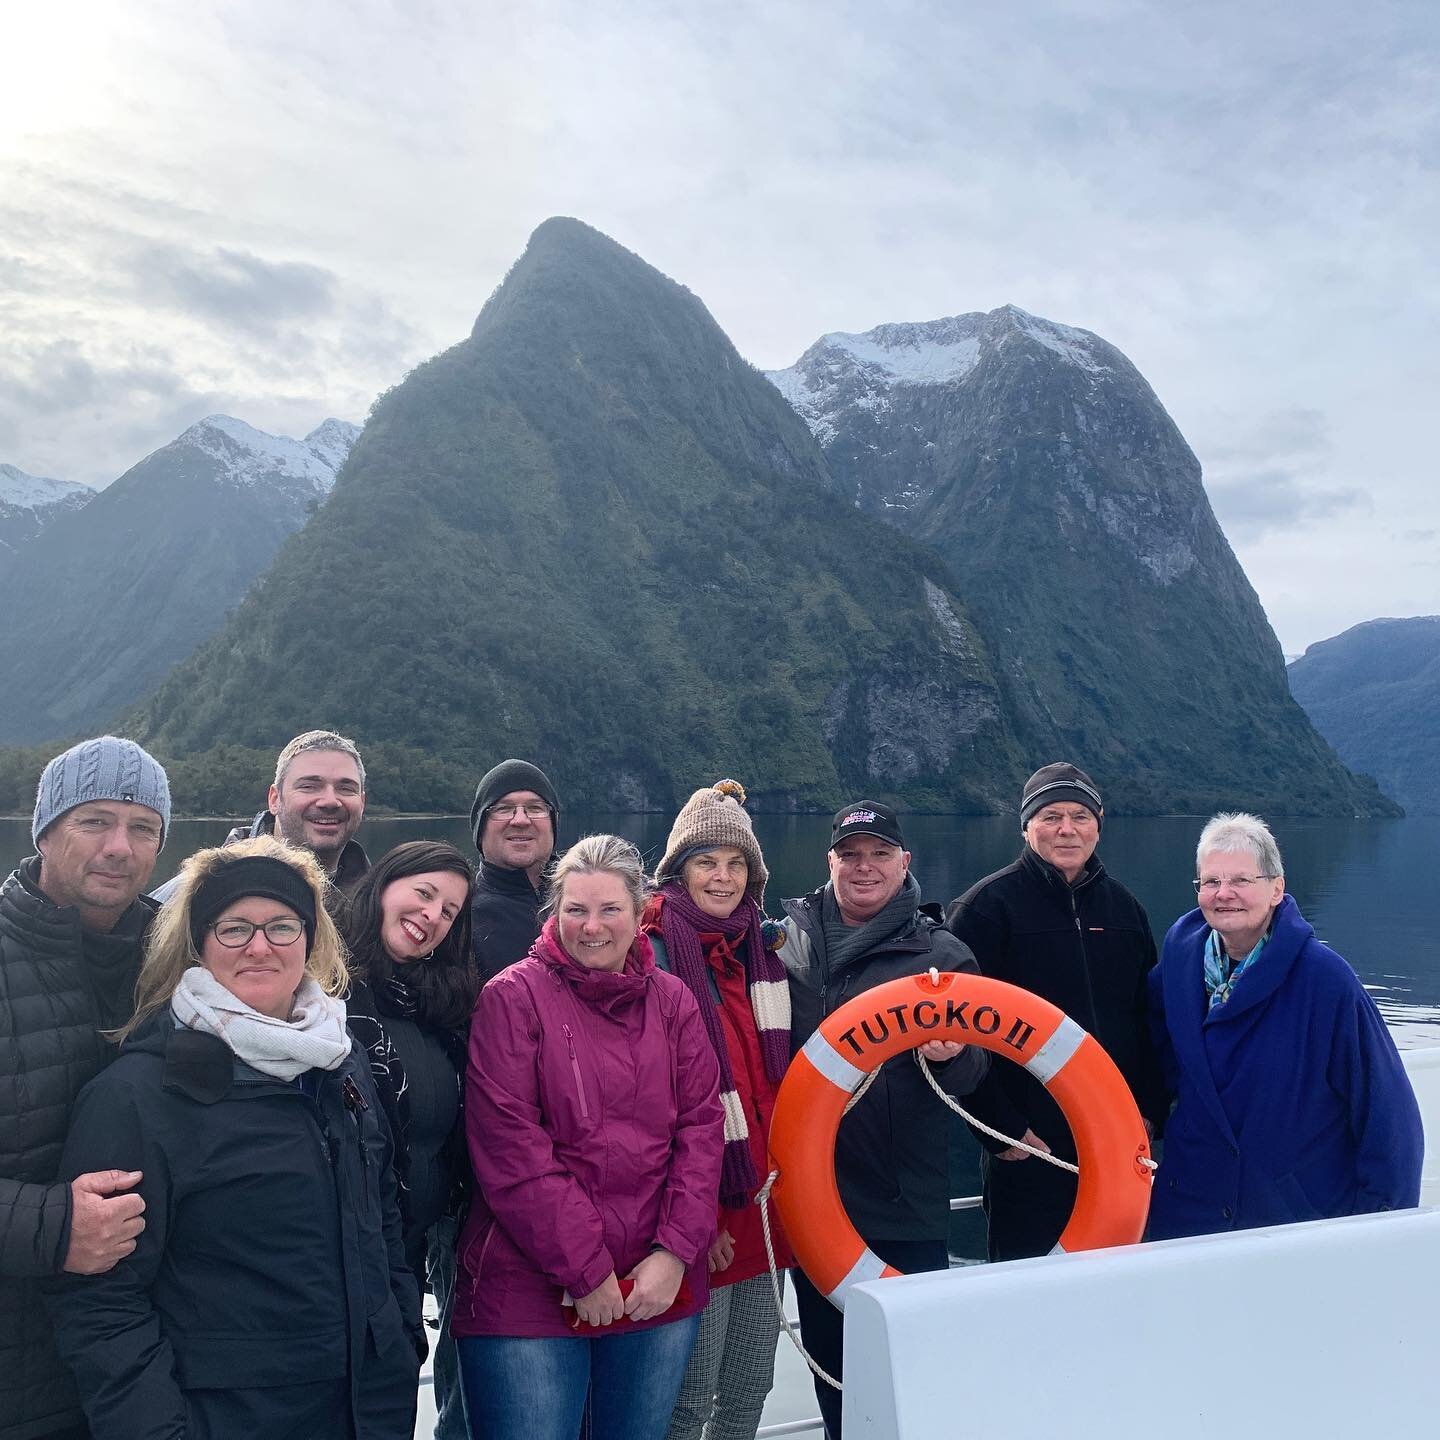 Another fantastic overnight with a great bunch of people exploring our backyard.#doutbfulsound #fiordland #teanau #ourbackyard #overnigth #nztraveltips #traveltipsnz #discovernewzealand #discoveryexpedition #expeditions